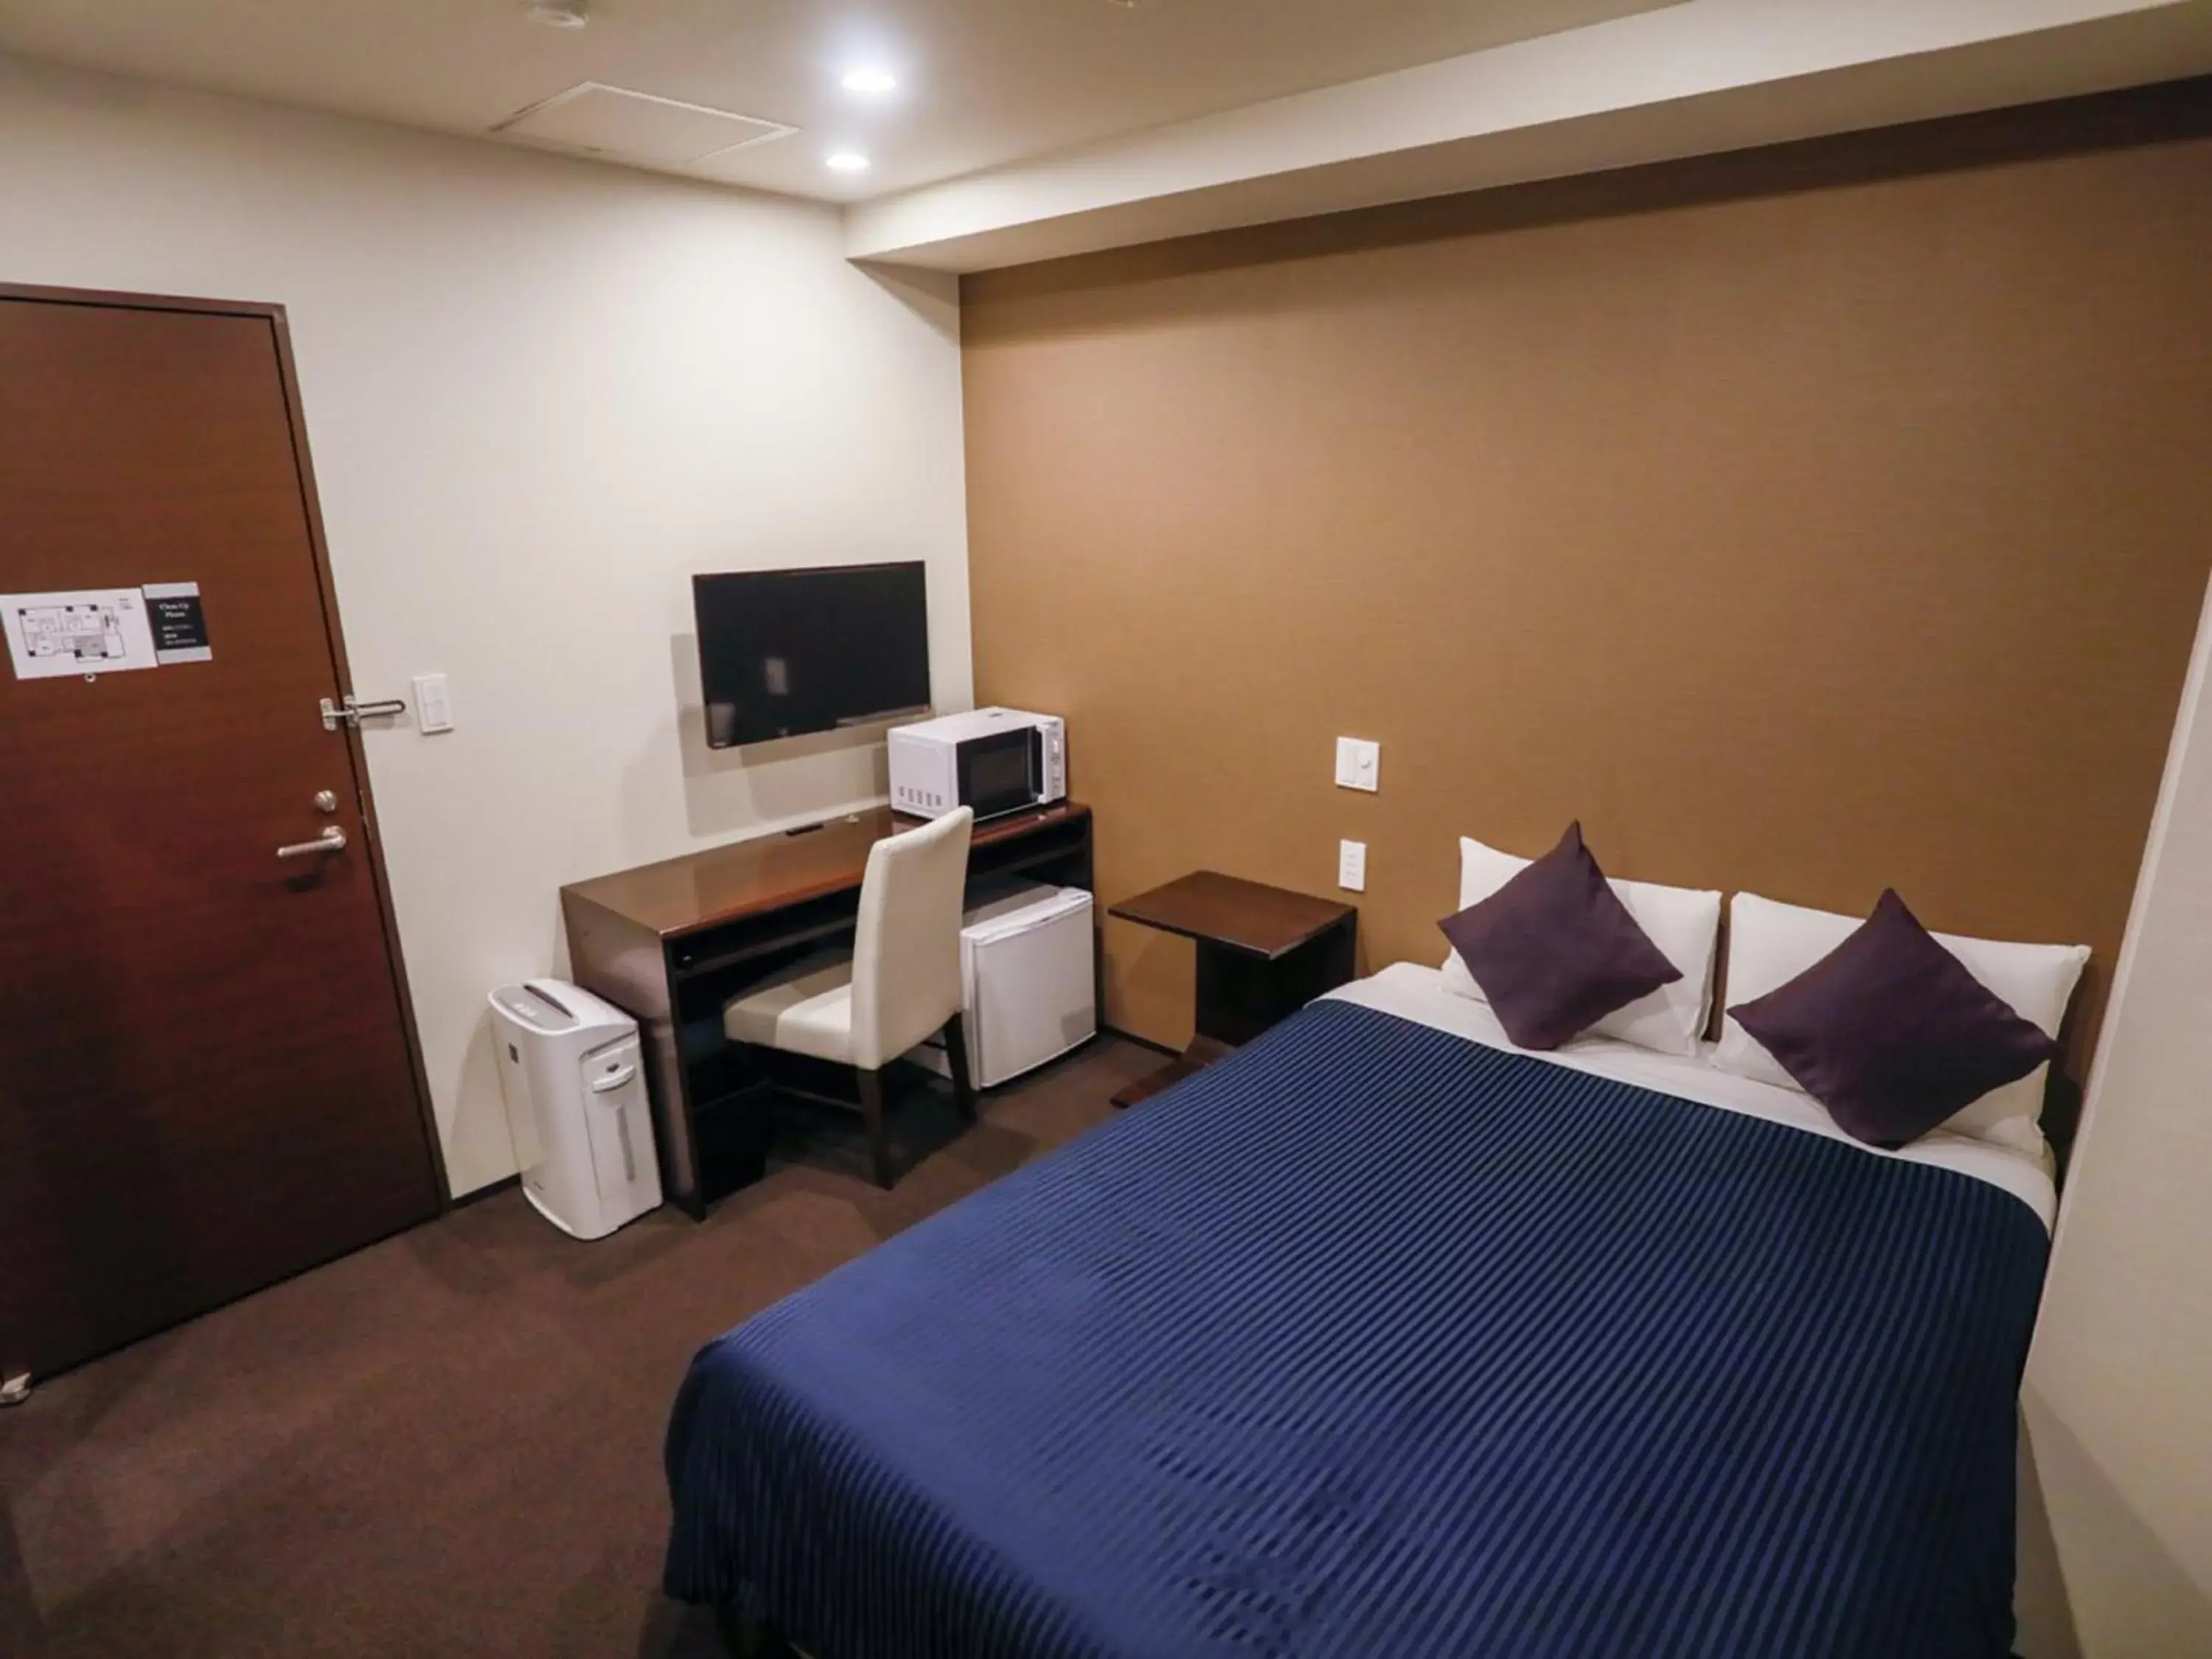 Bed in HOTEL LiVEMAX Higashi Ginza